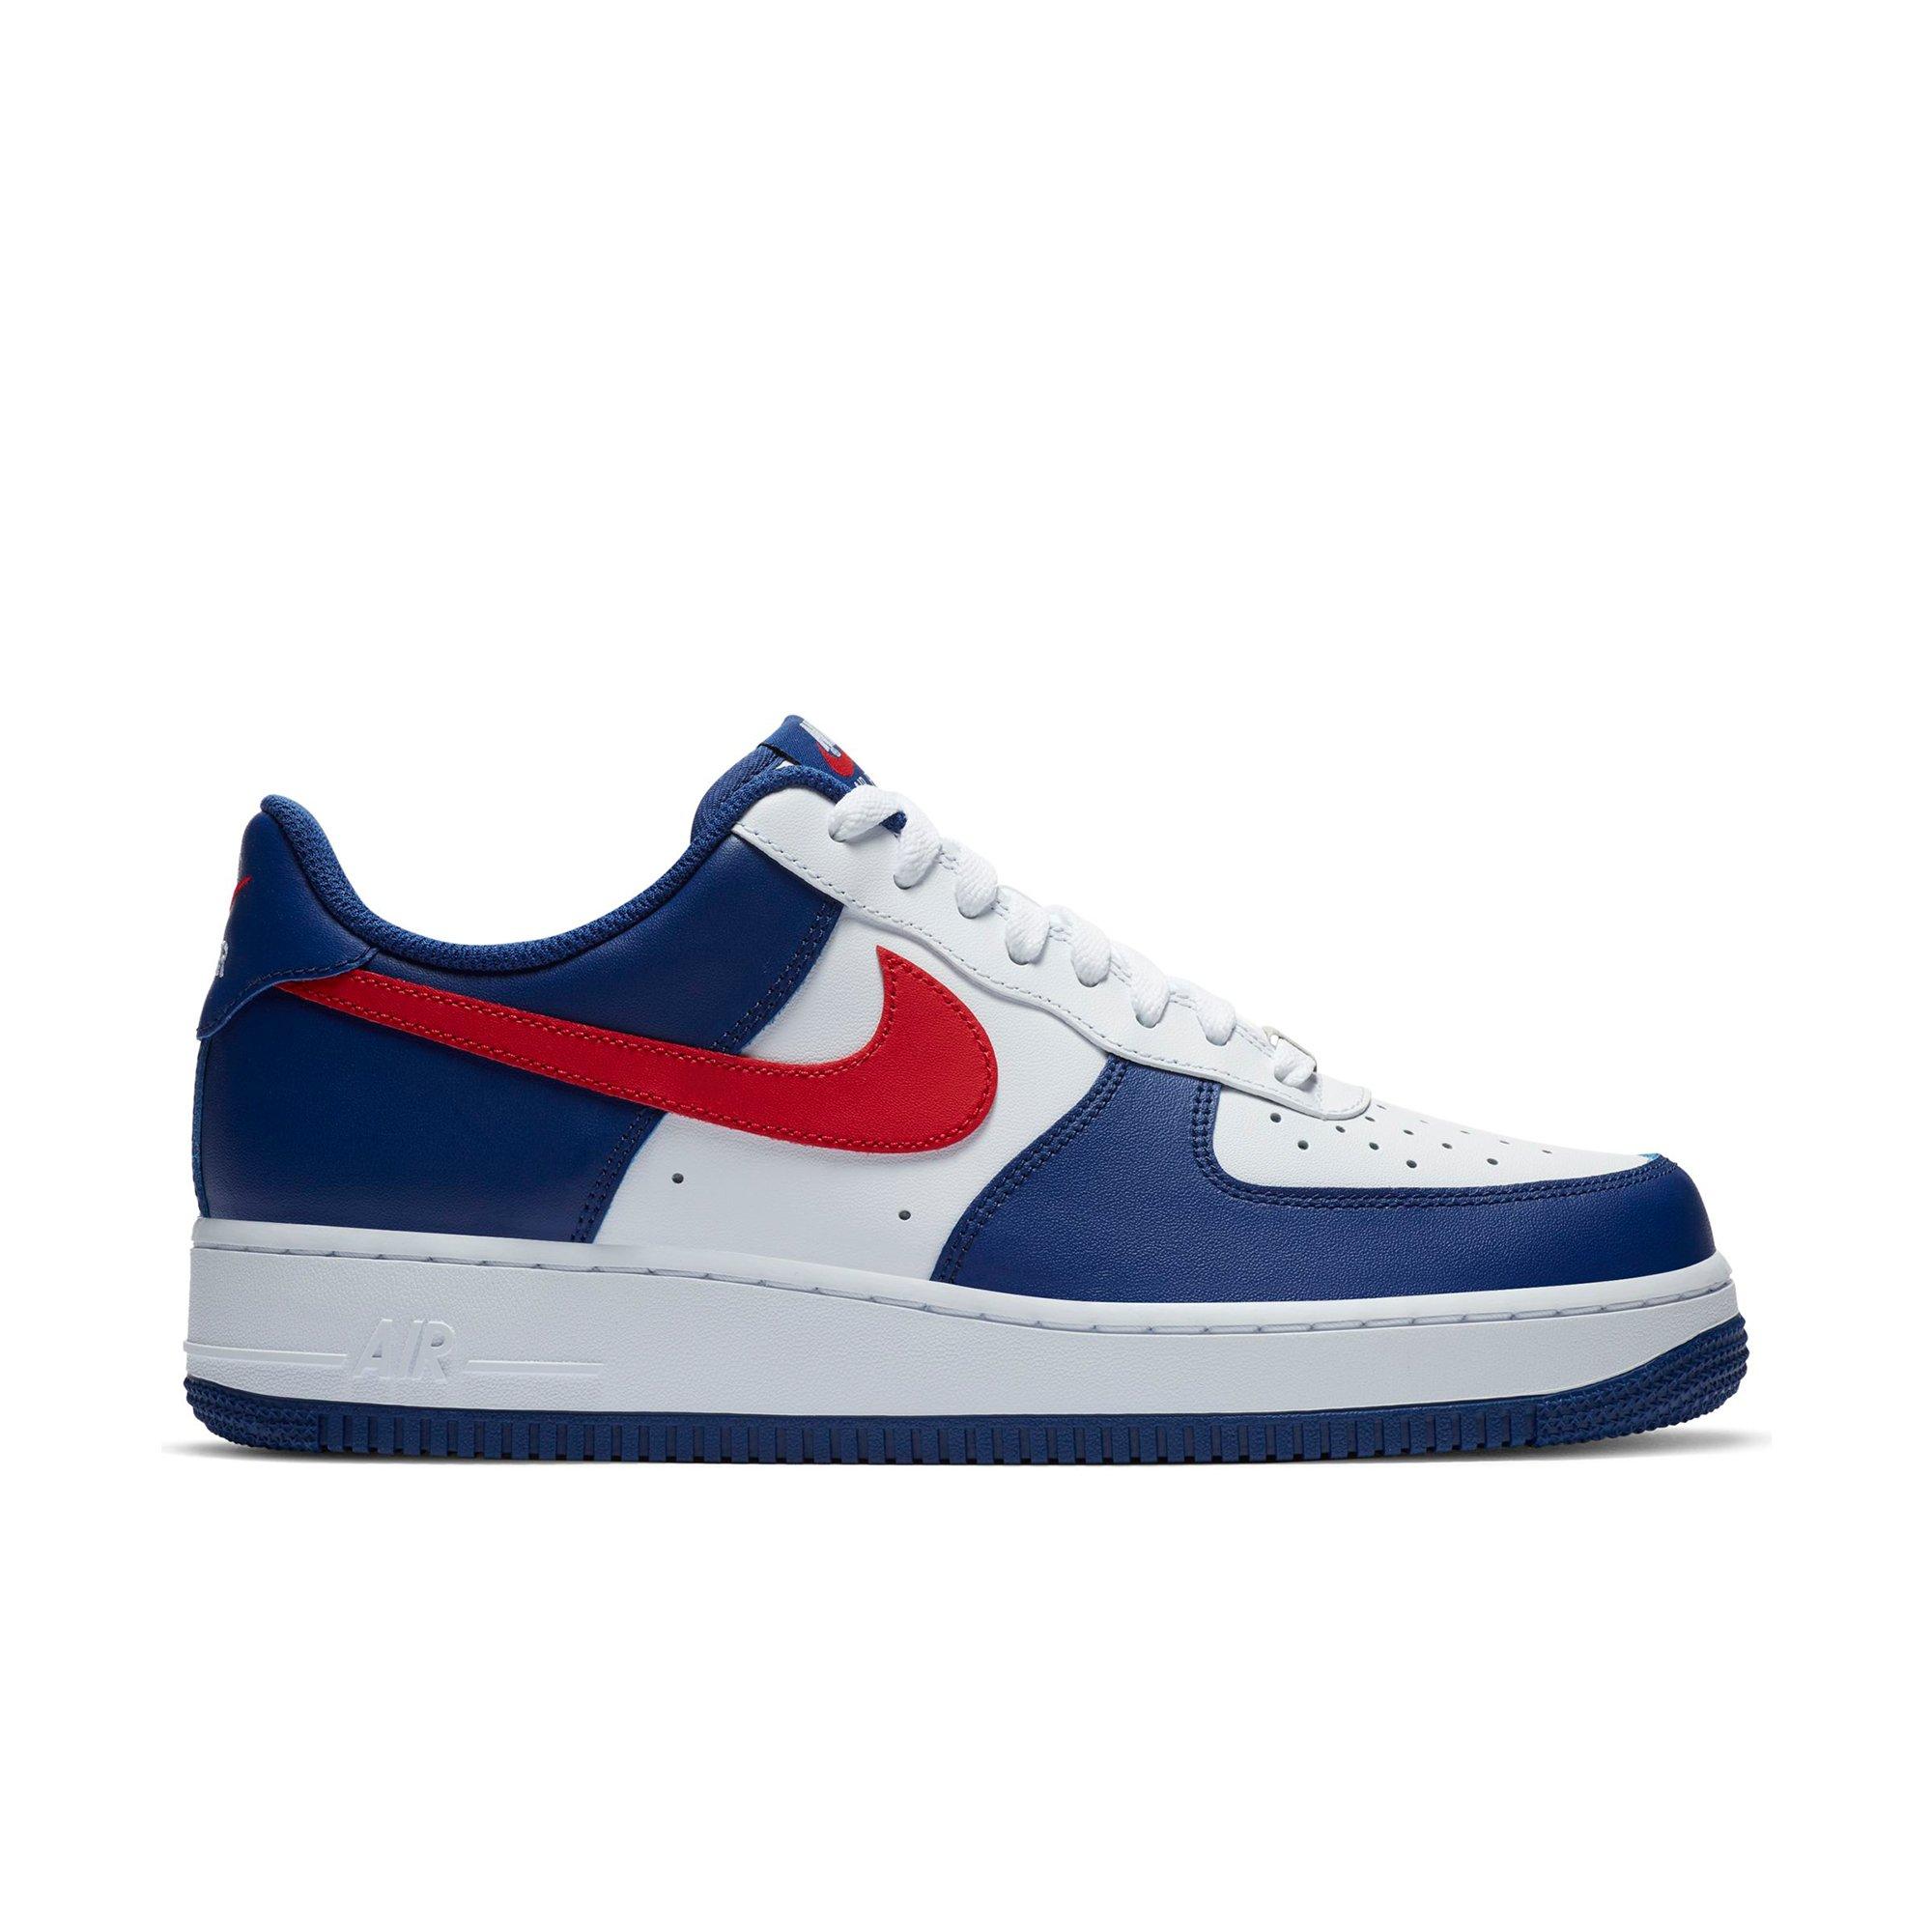 red blue and white af1